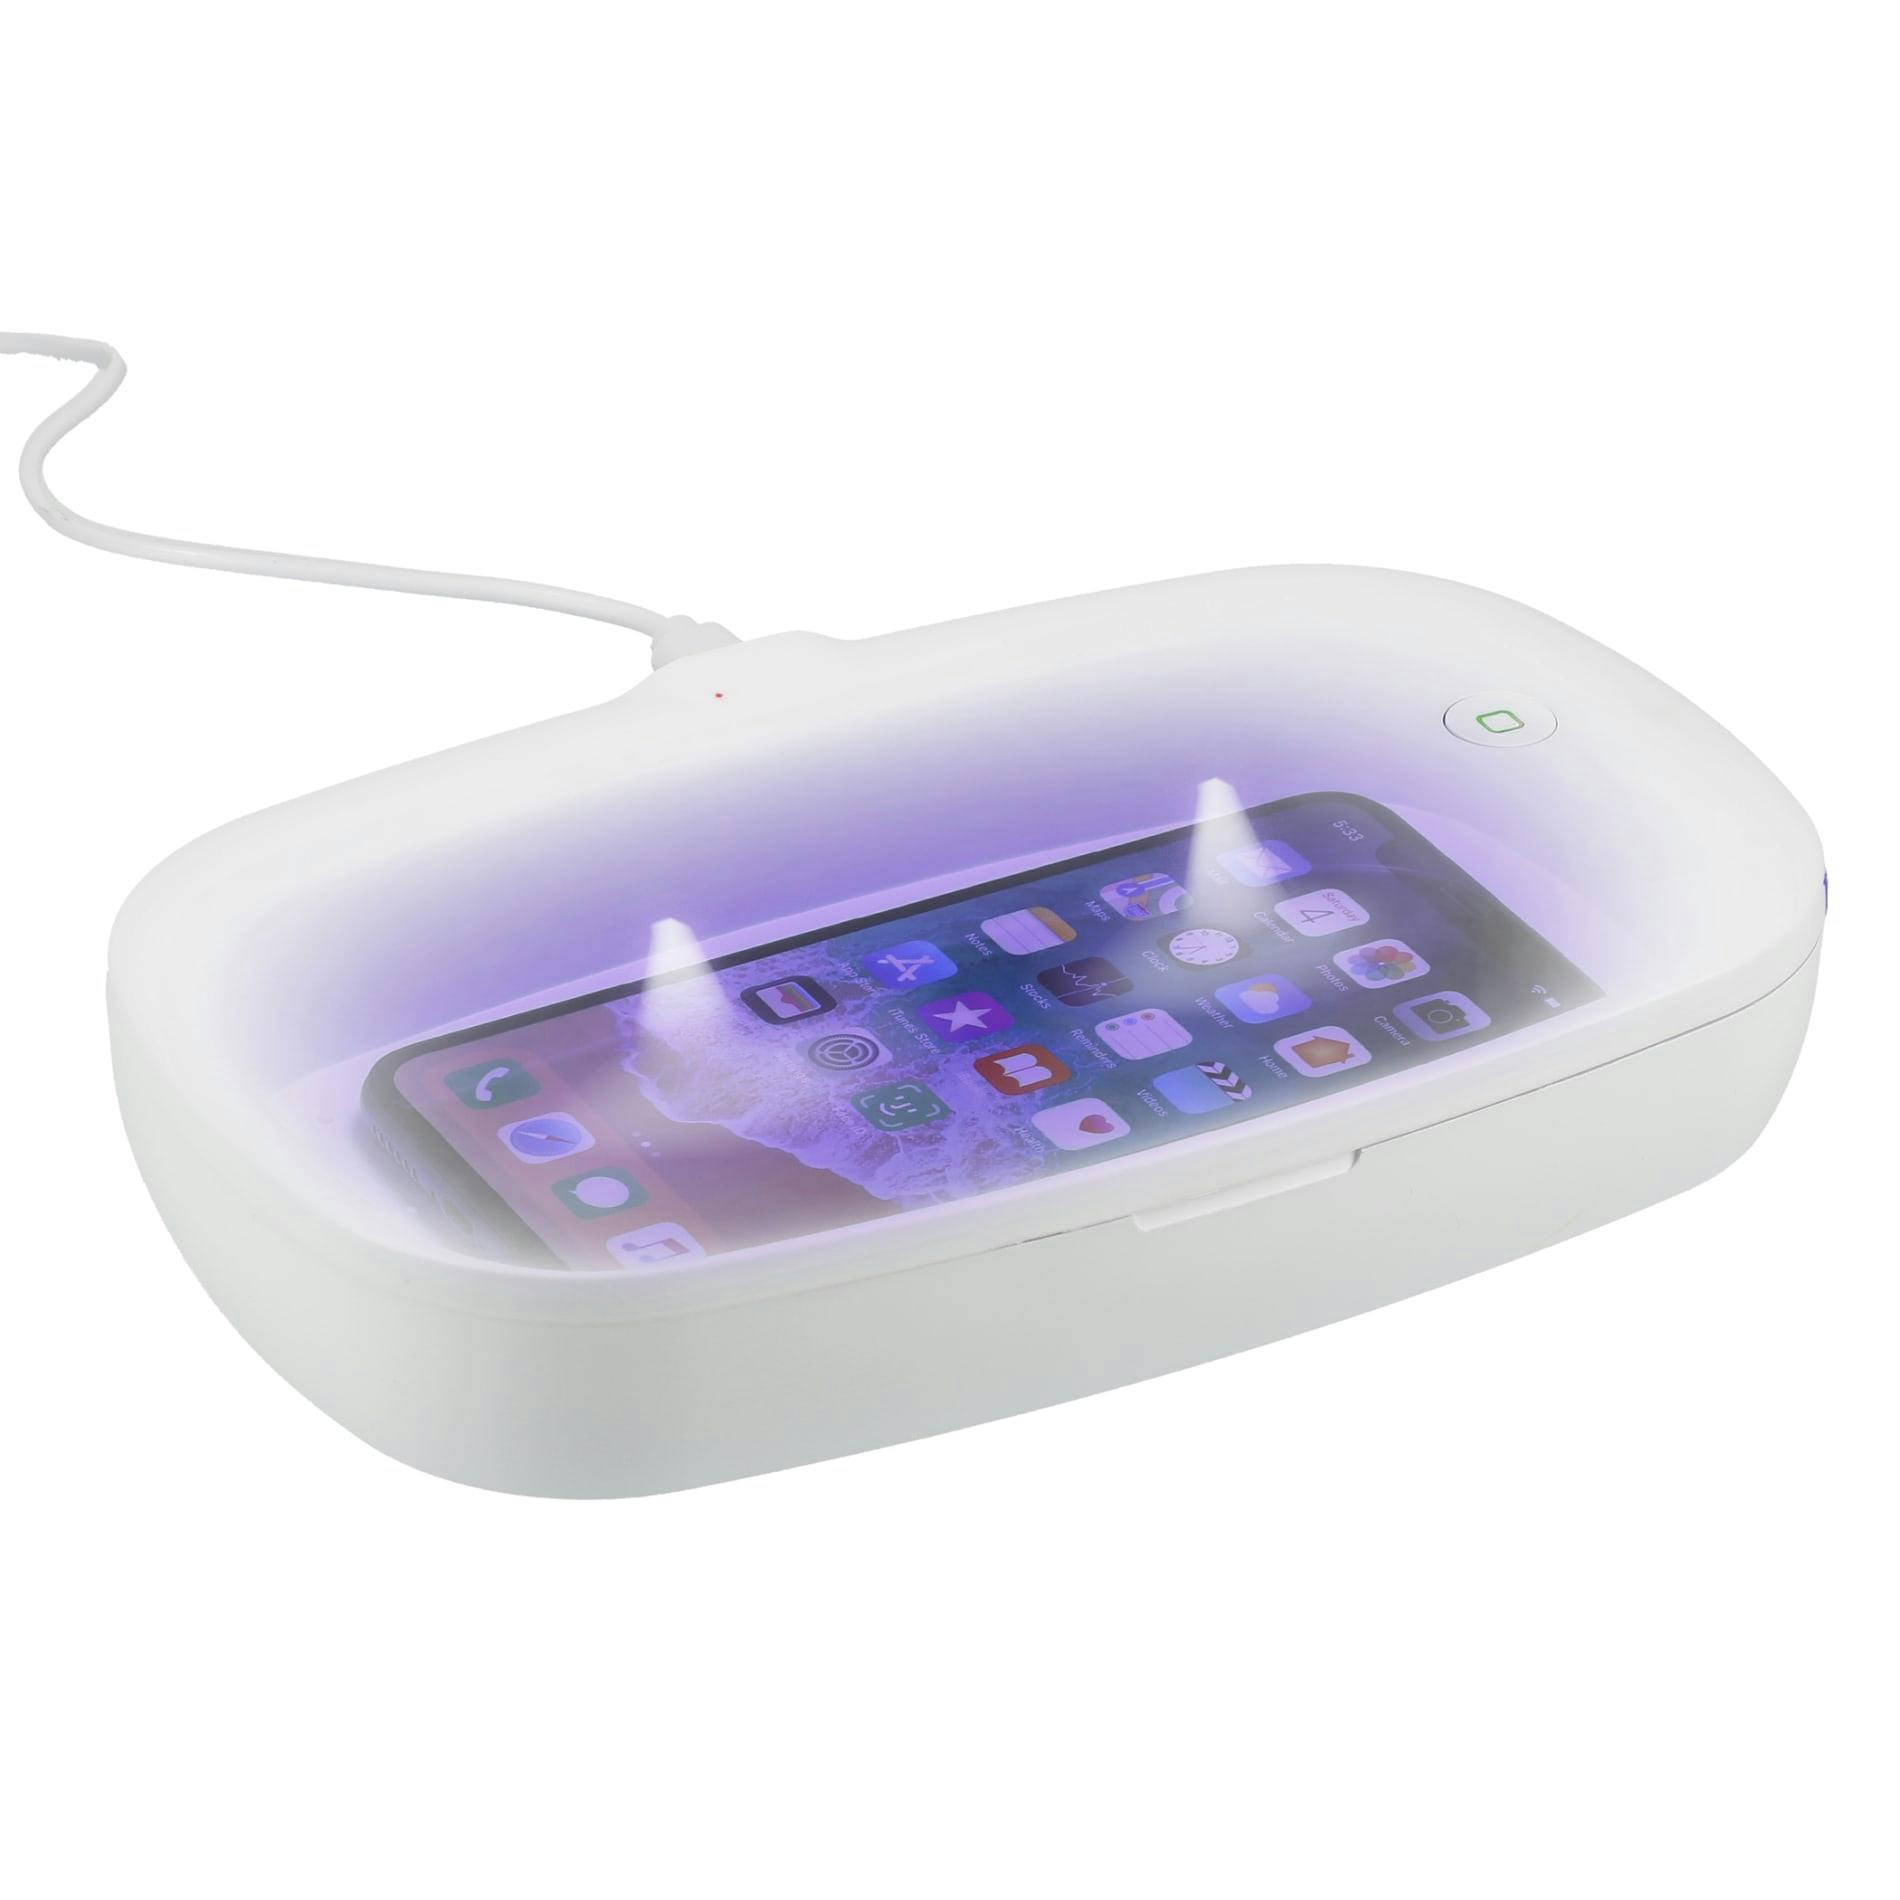 UV Phone Sanitizer with Wireless Charging Pad - additional Image 2